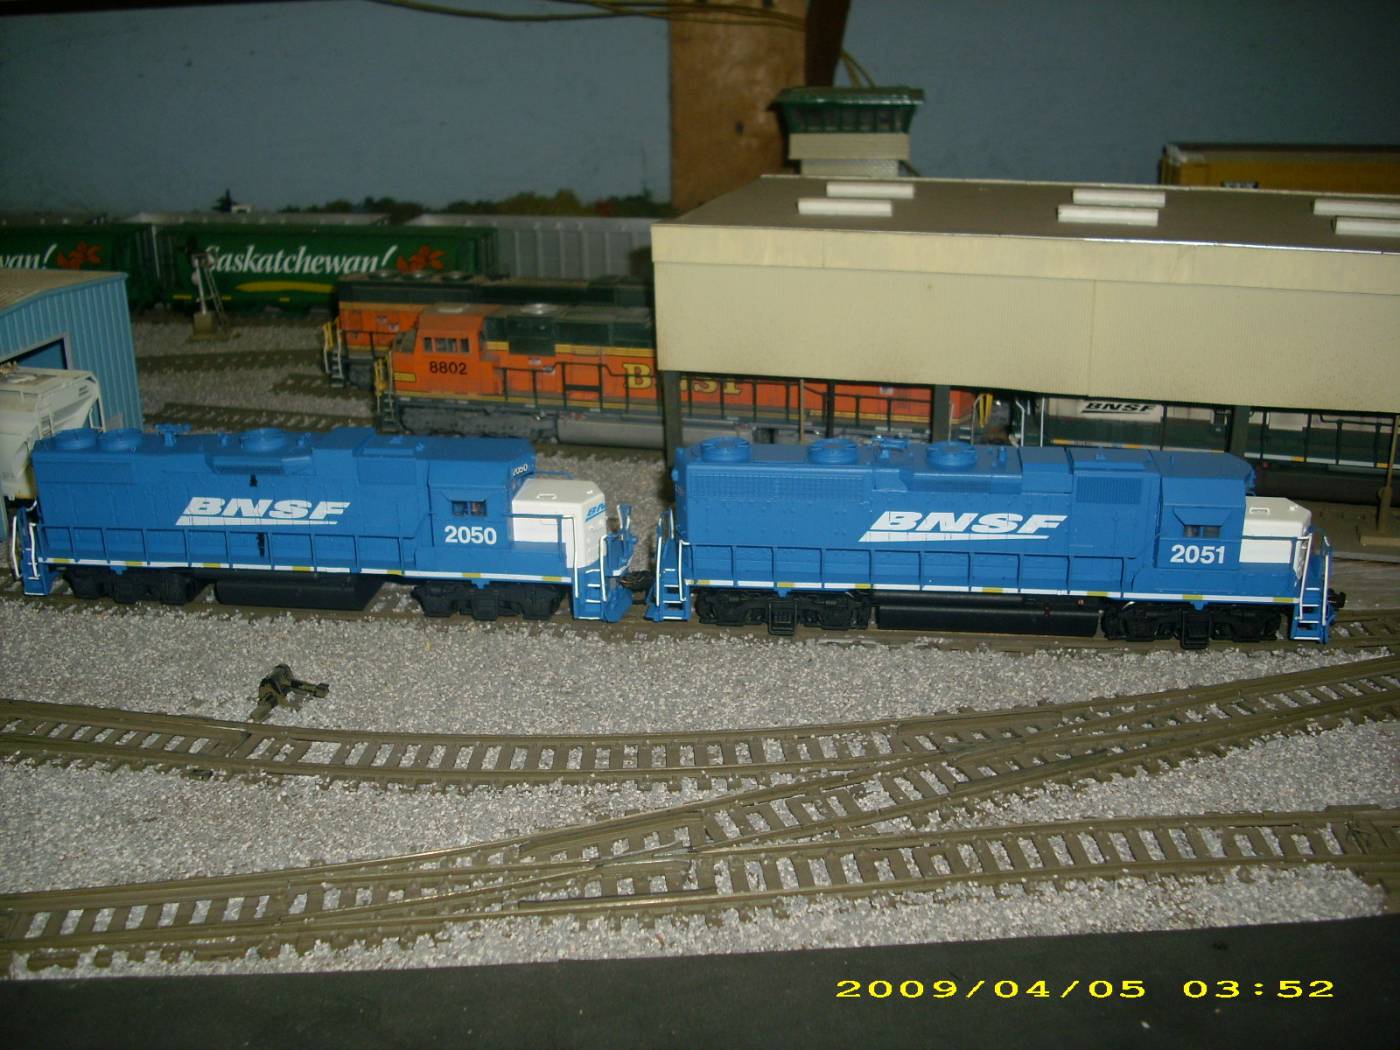 bnsf 2050 and 2051